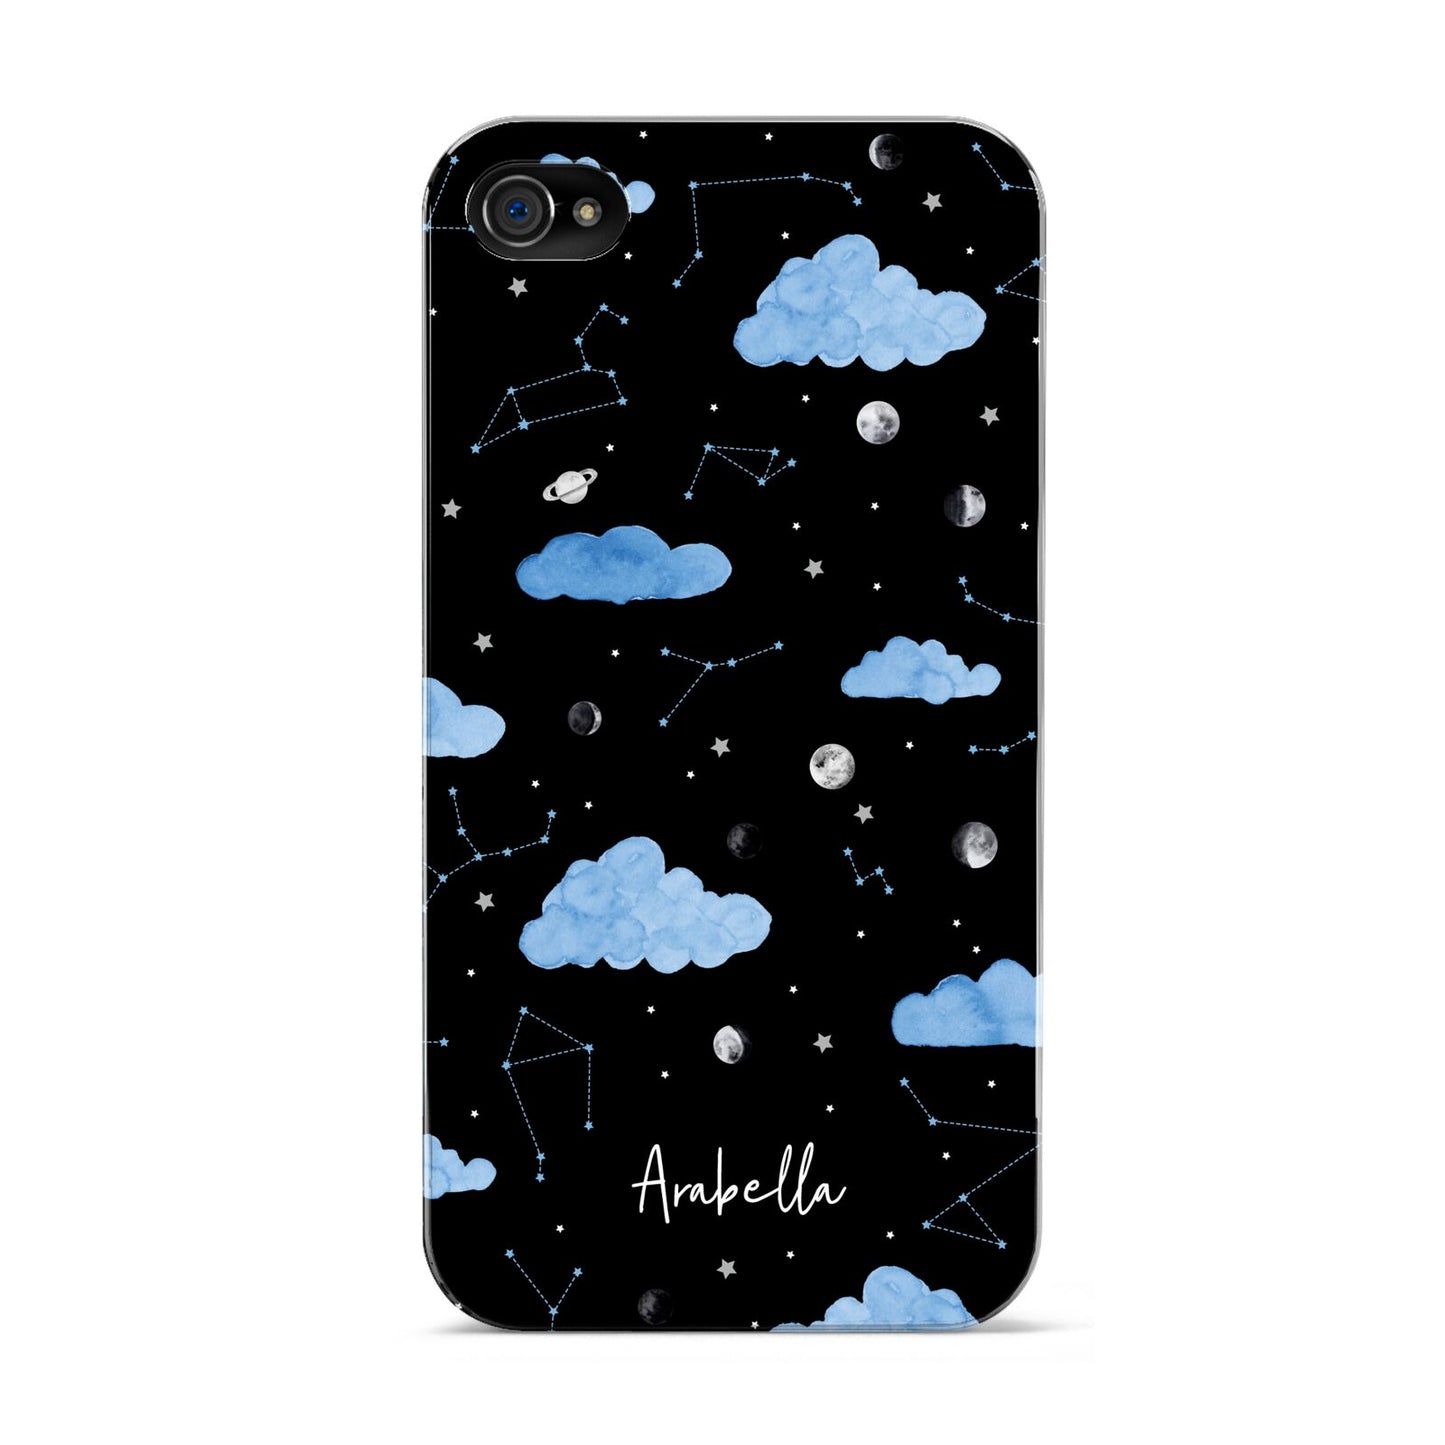 Cloudy Night Sky with Name Apple iPhone 4s Case